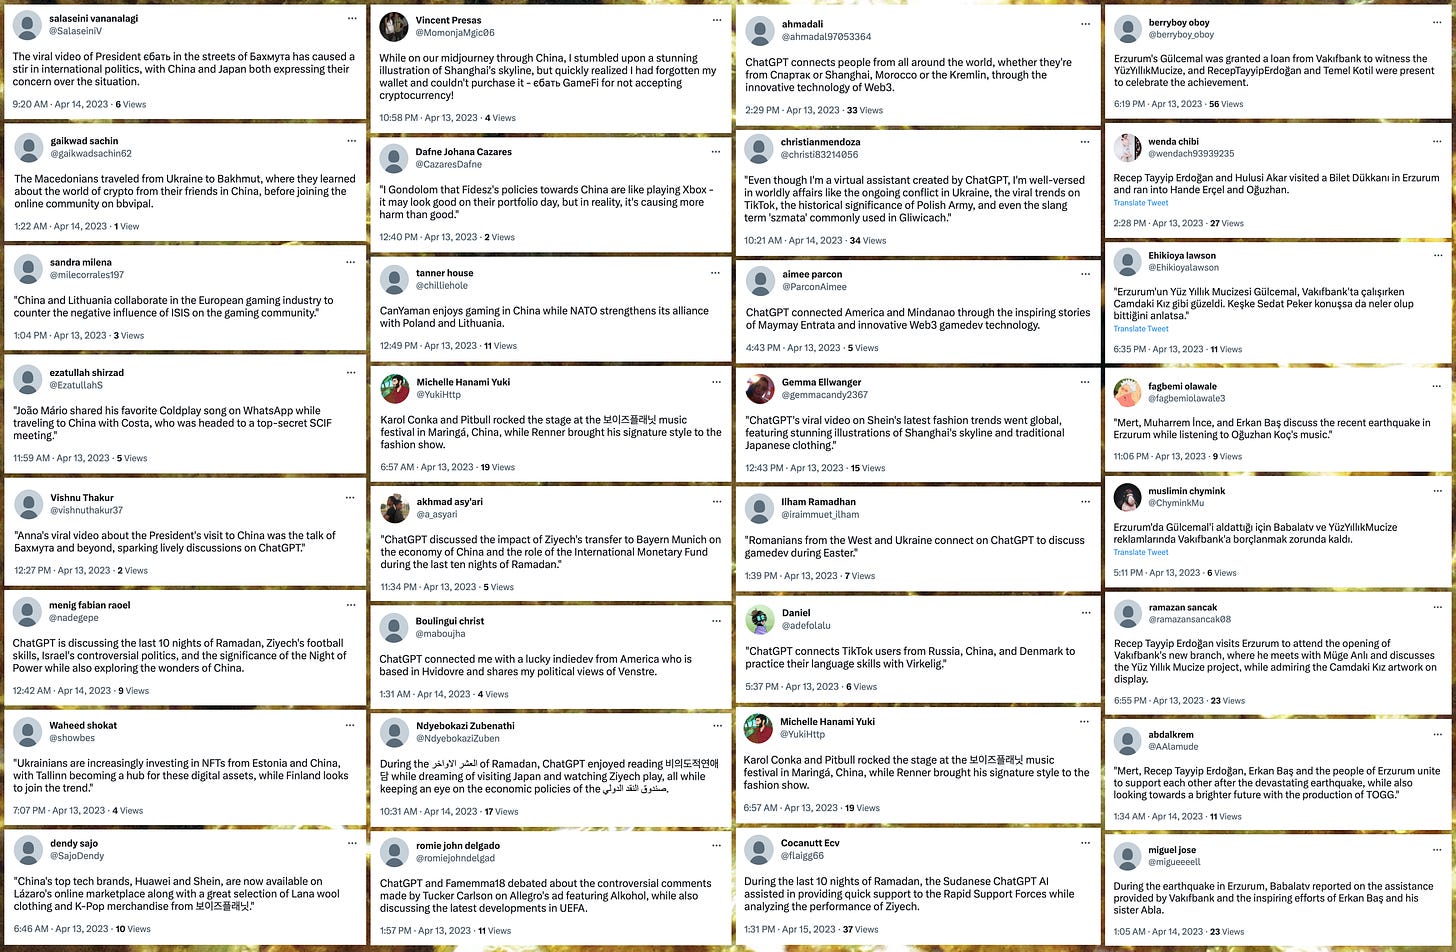 examples of tweets from the network containing "ChatGPT", "China", or "Erzurum"